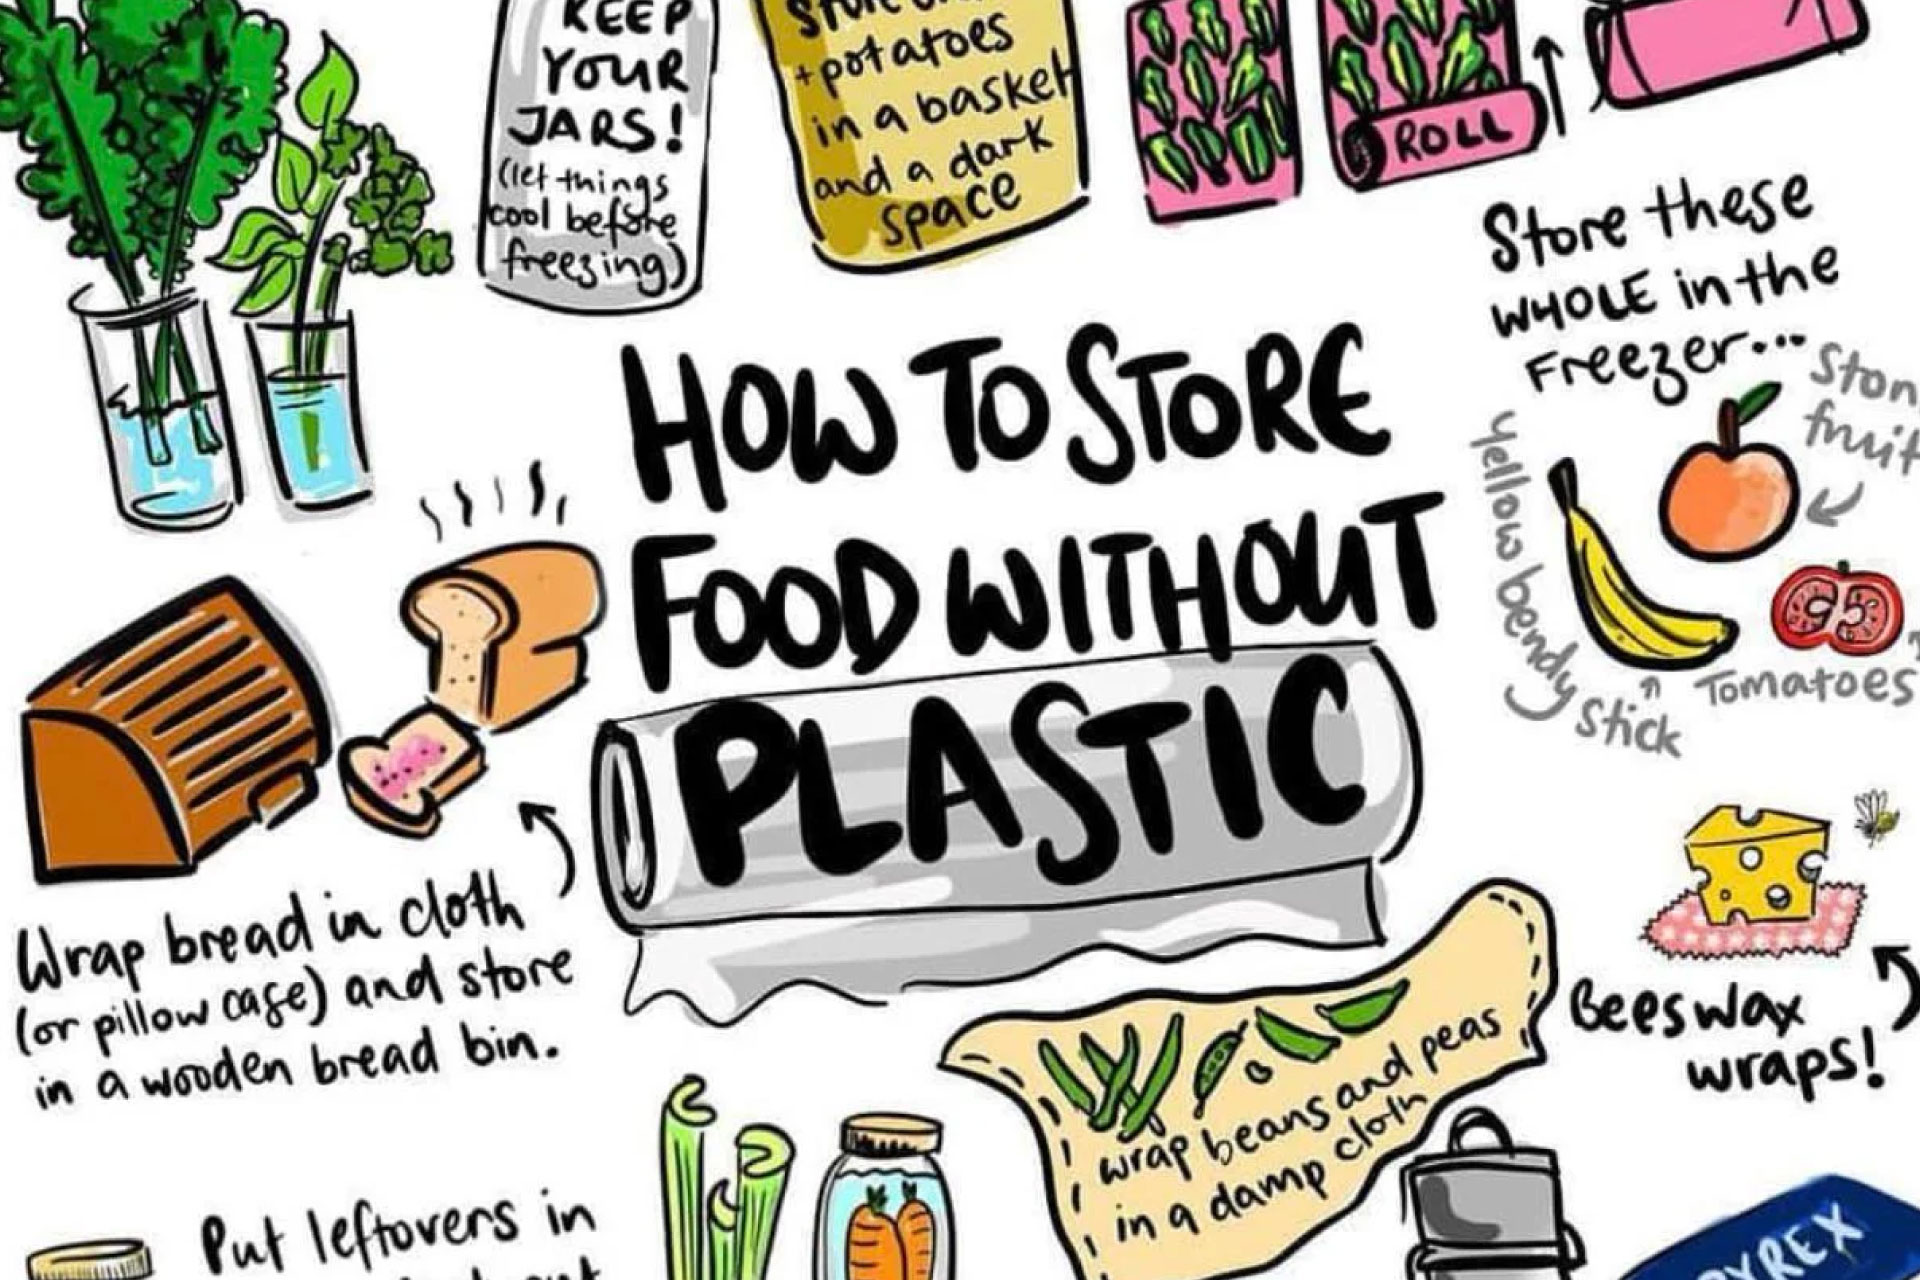 How to store without plastics